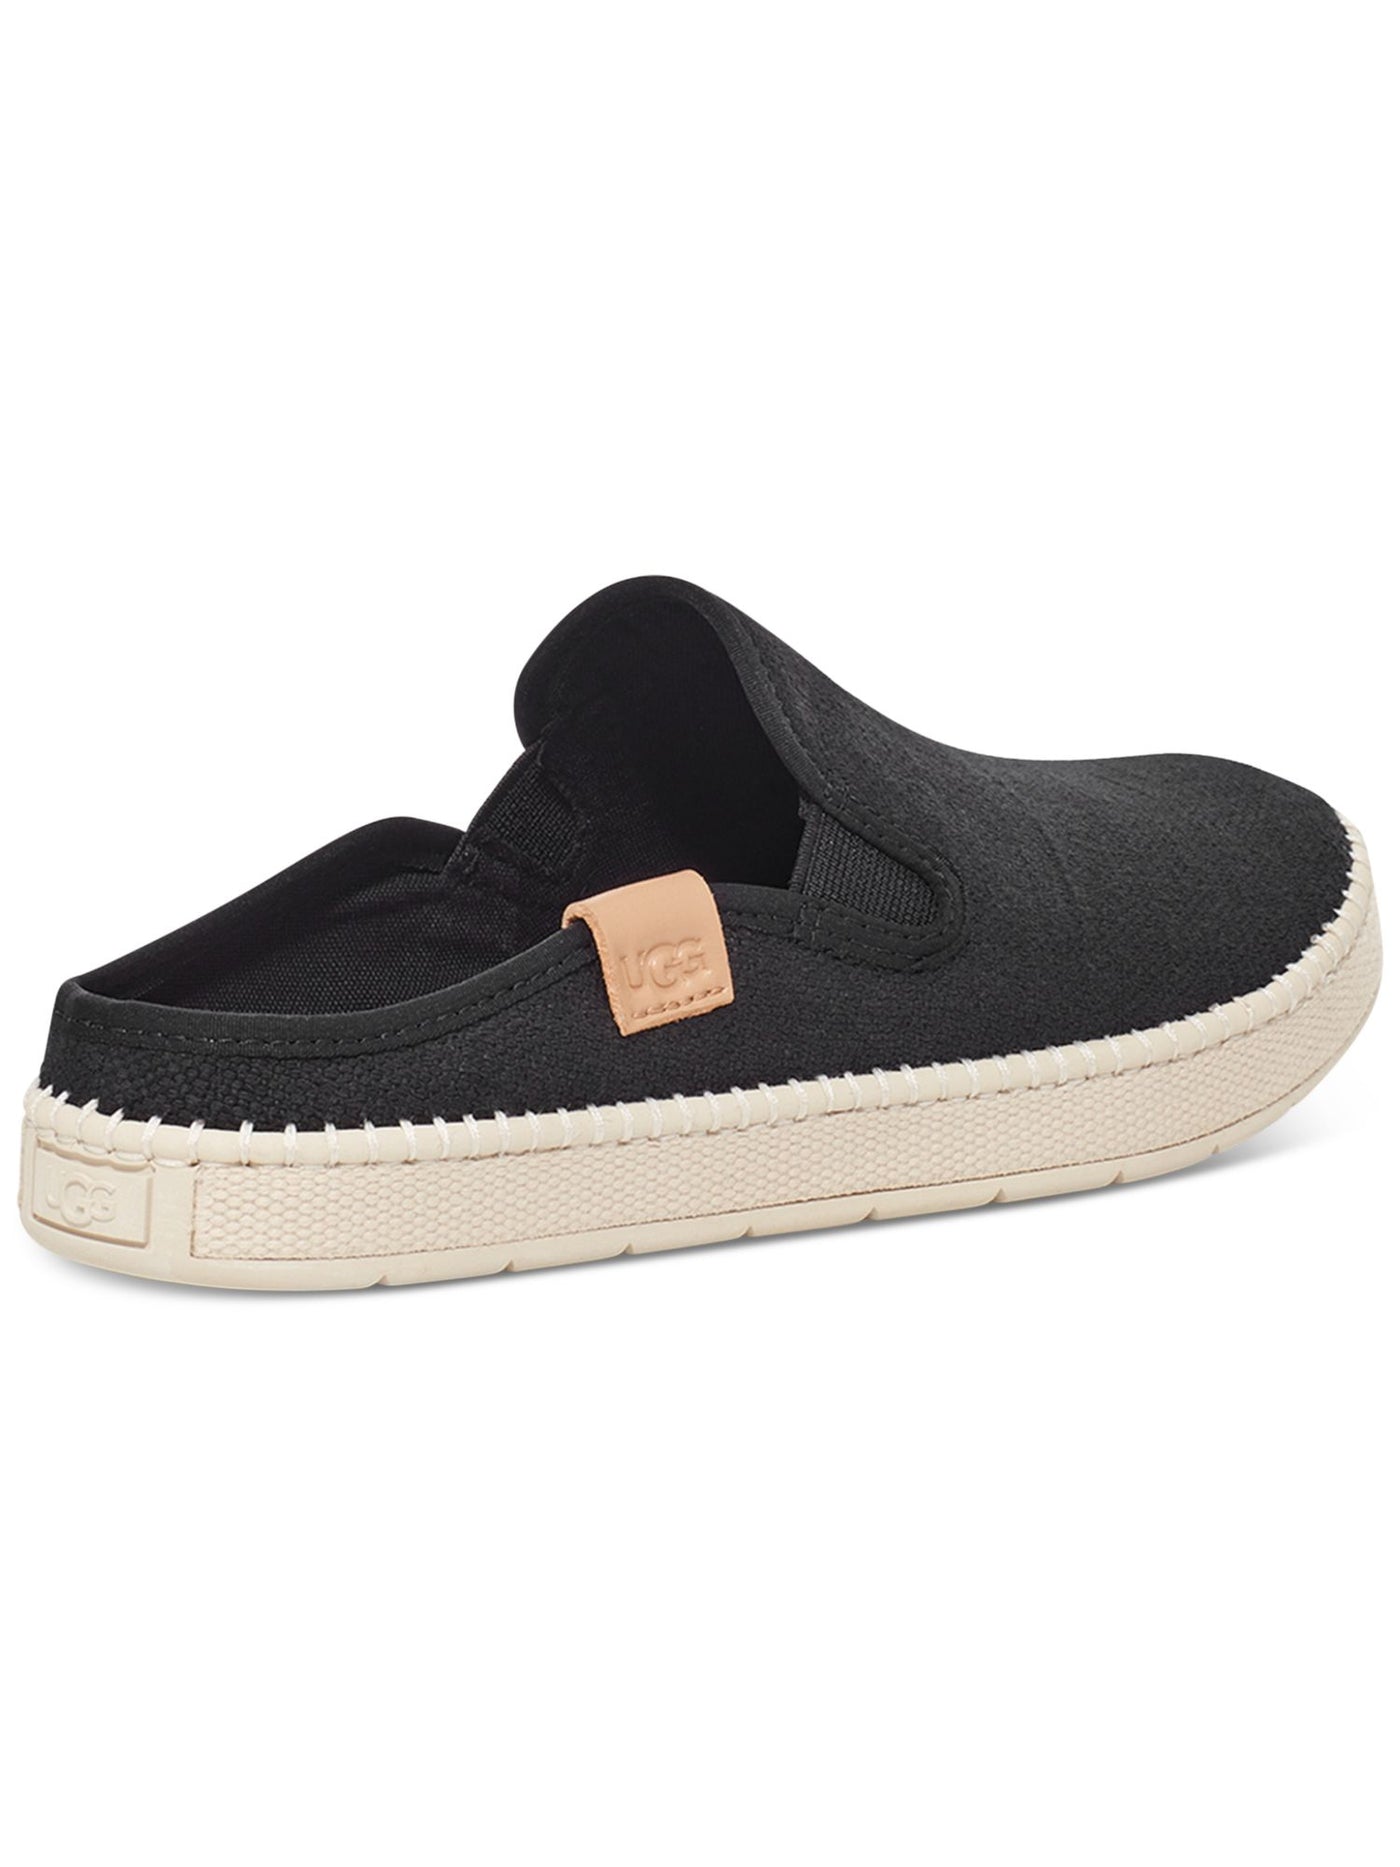 UGG Womens Black Goring Removable Insole Cushioned Delu Round Toe Platform Slip On Mules 6